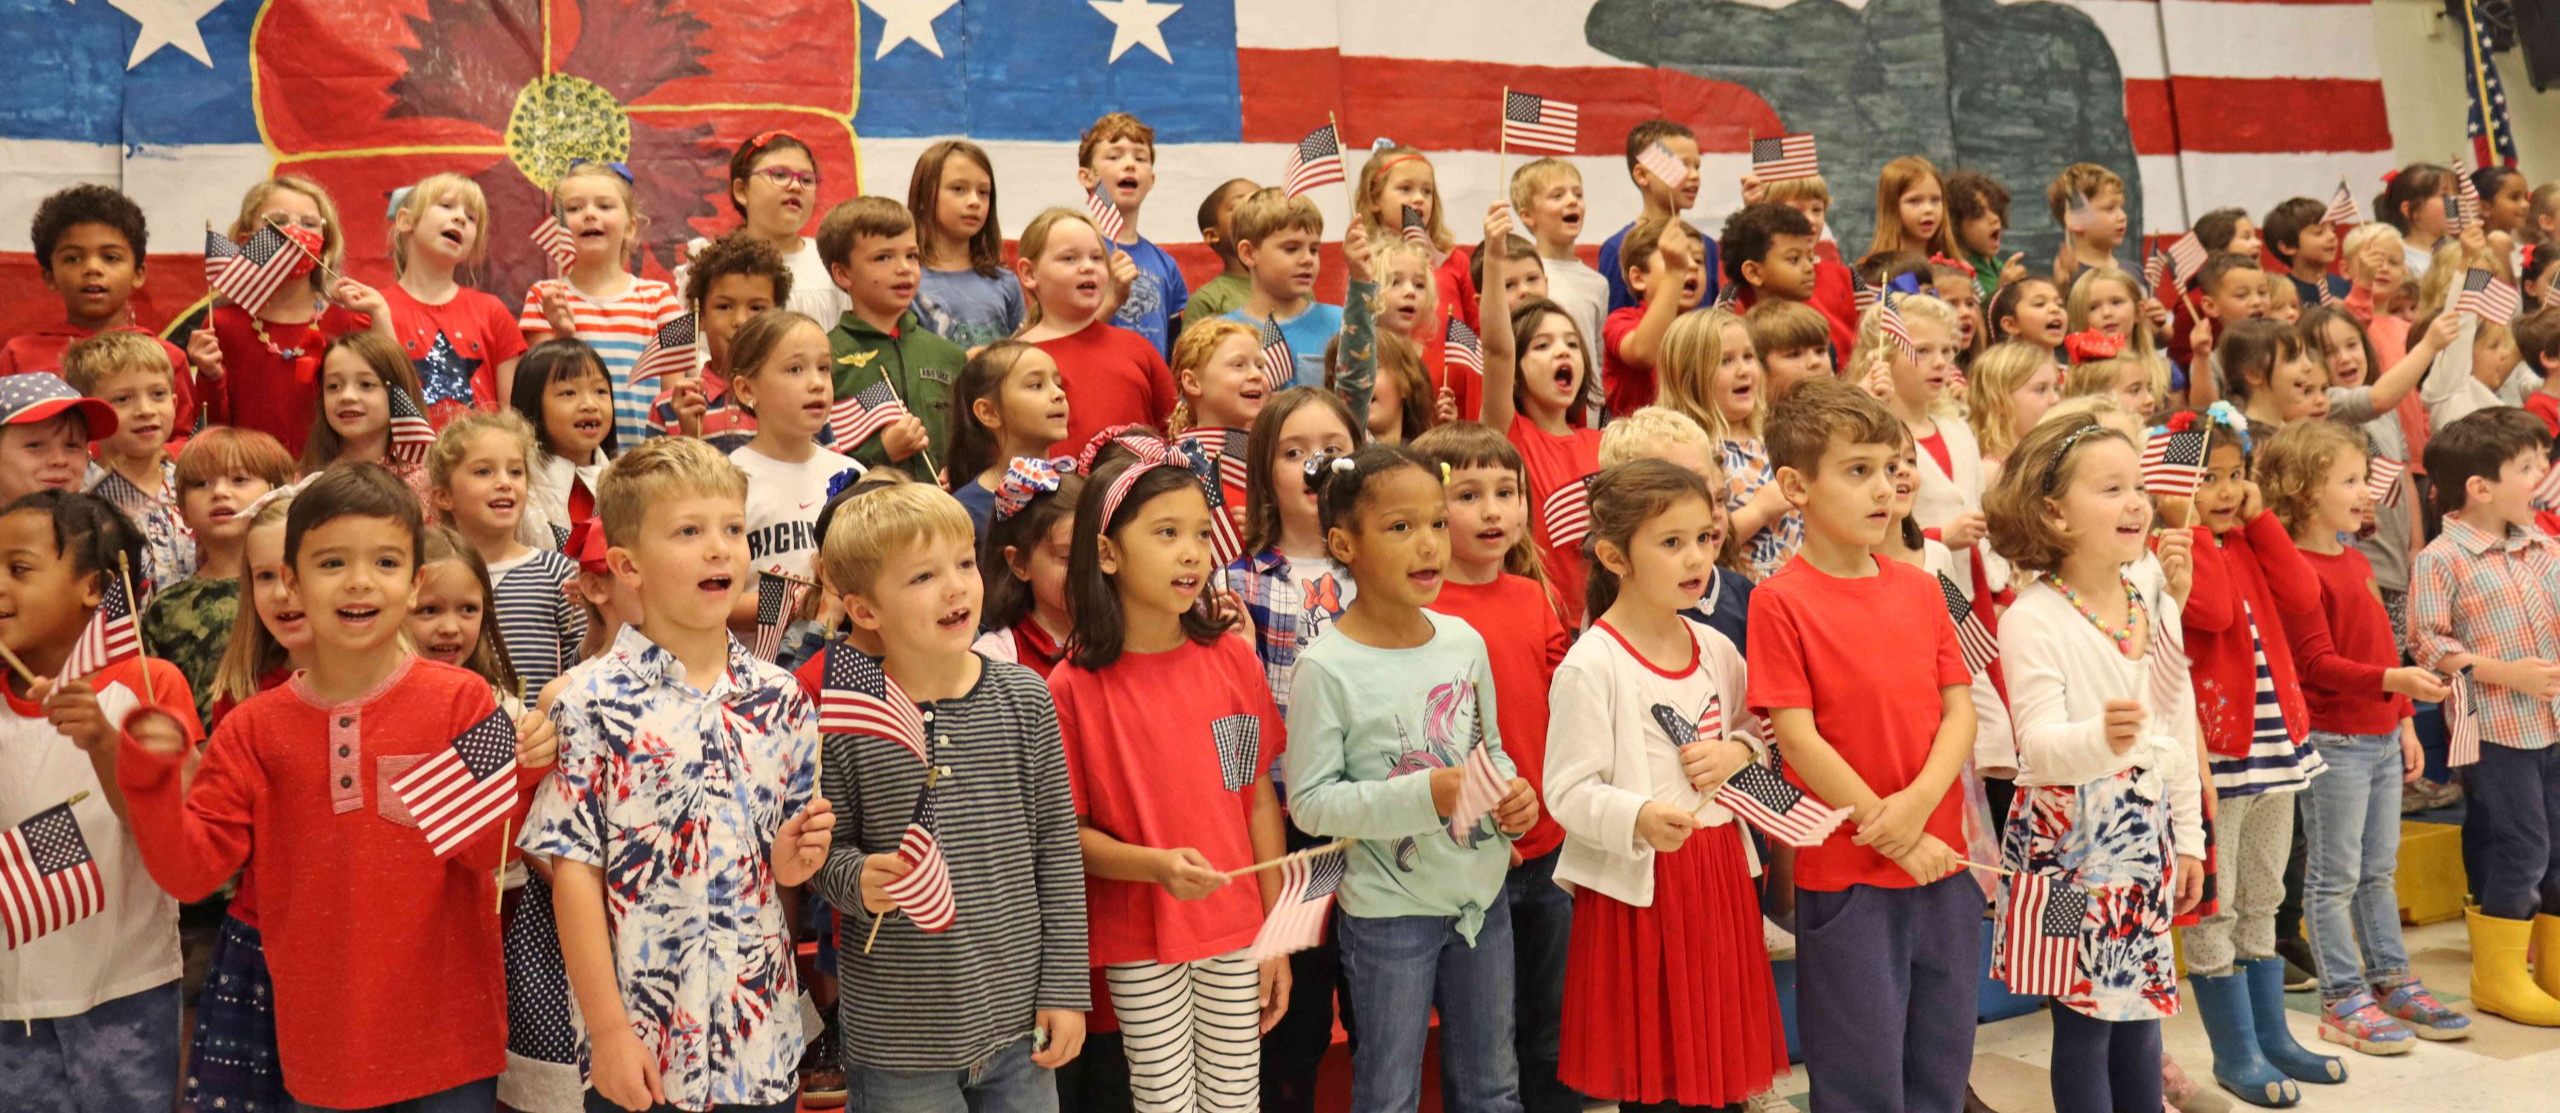 A group of students singing during a Veterans Day event